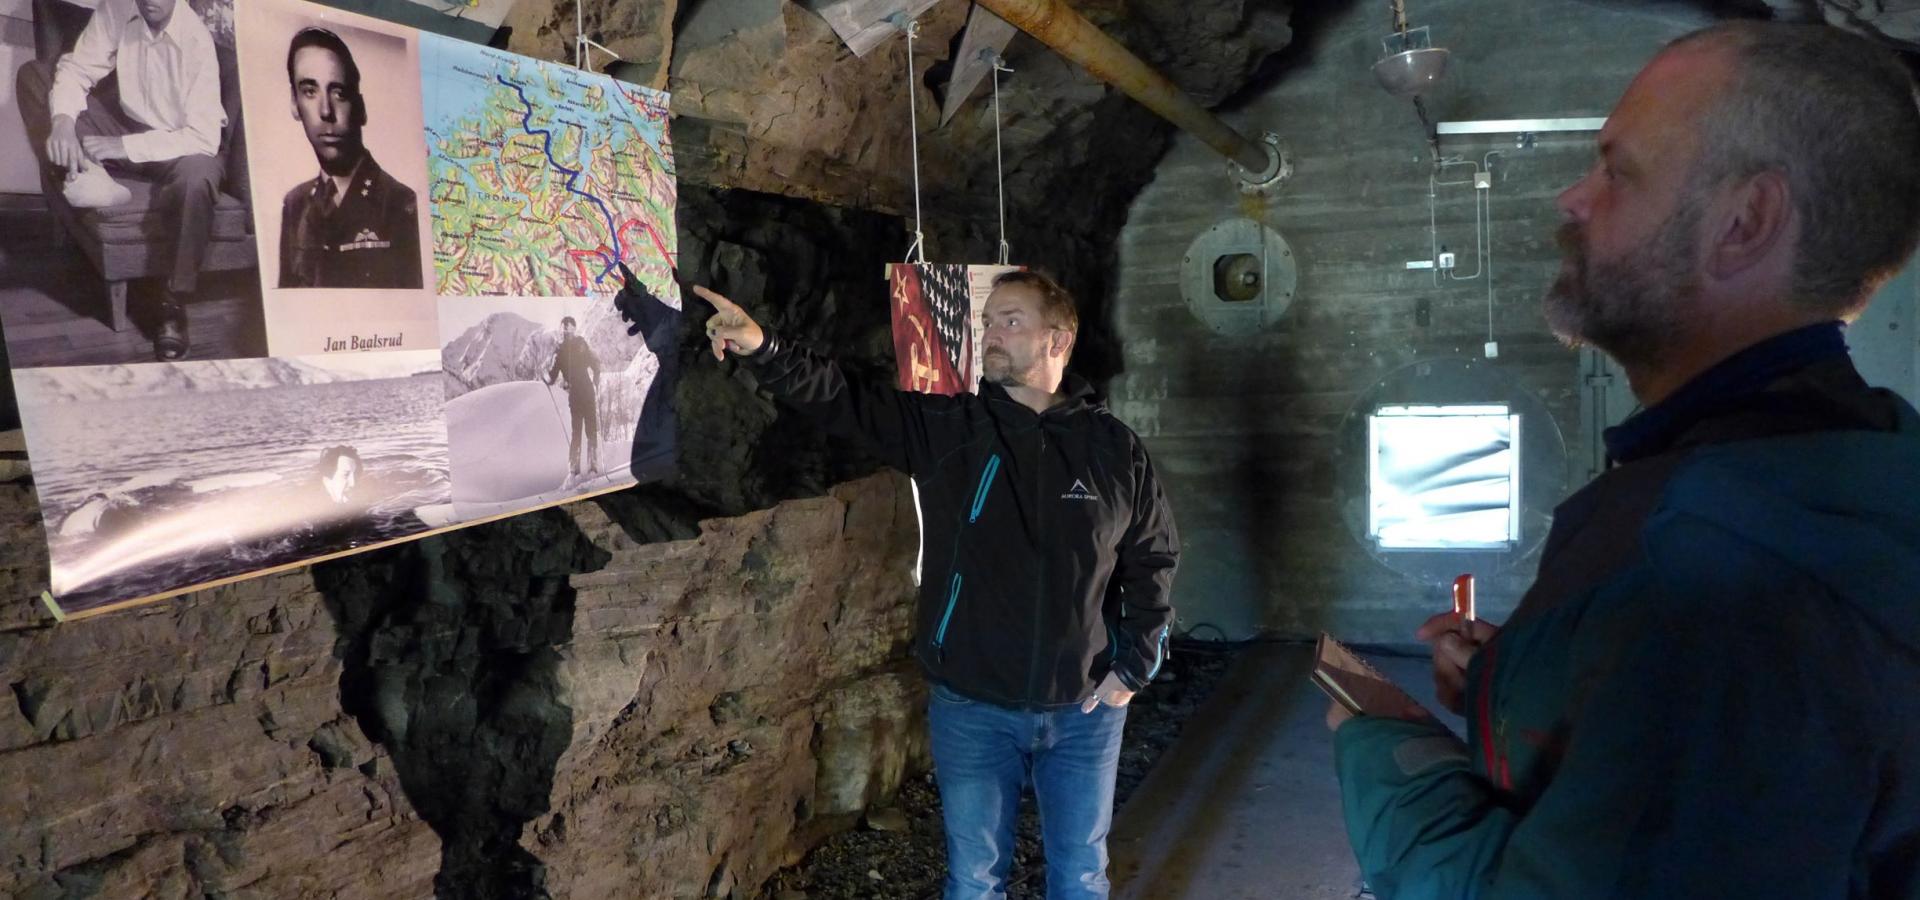 A guide showing the exhibition to a visitor, within a bunkers